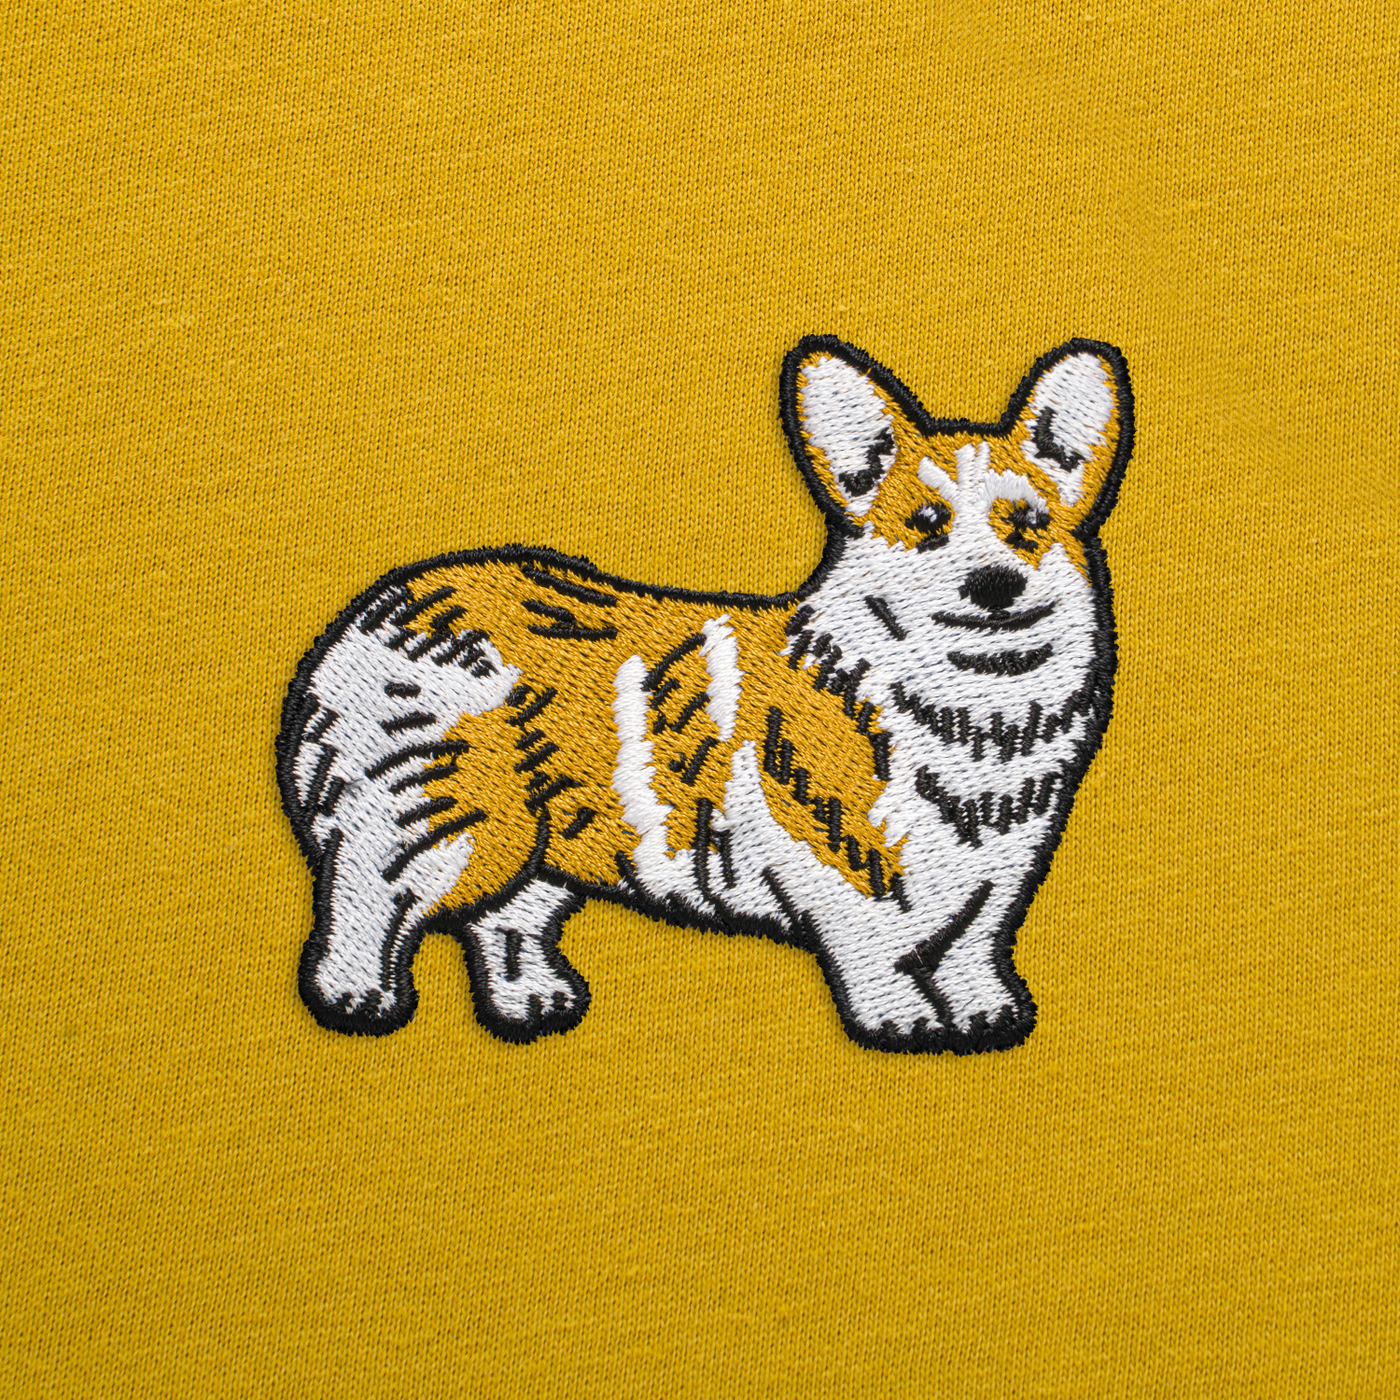 Bobby's Planet Men's Embroidered Corgi T-Shirt from Paws Dog Cat Animals Collection in Mustard Color#color_mustard